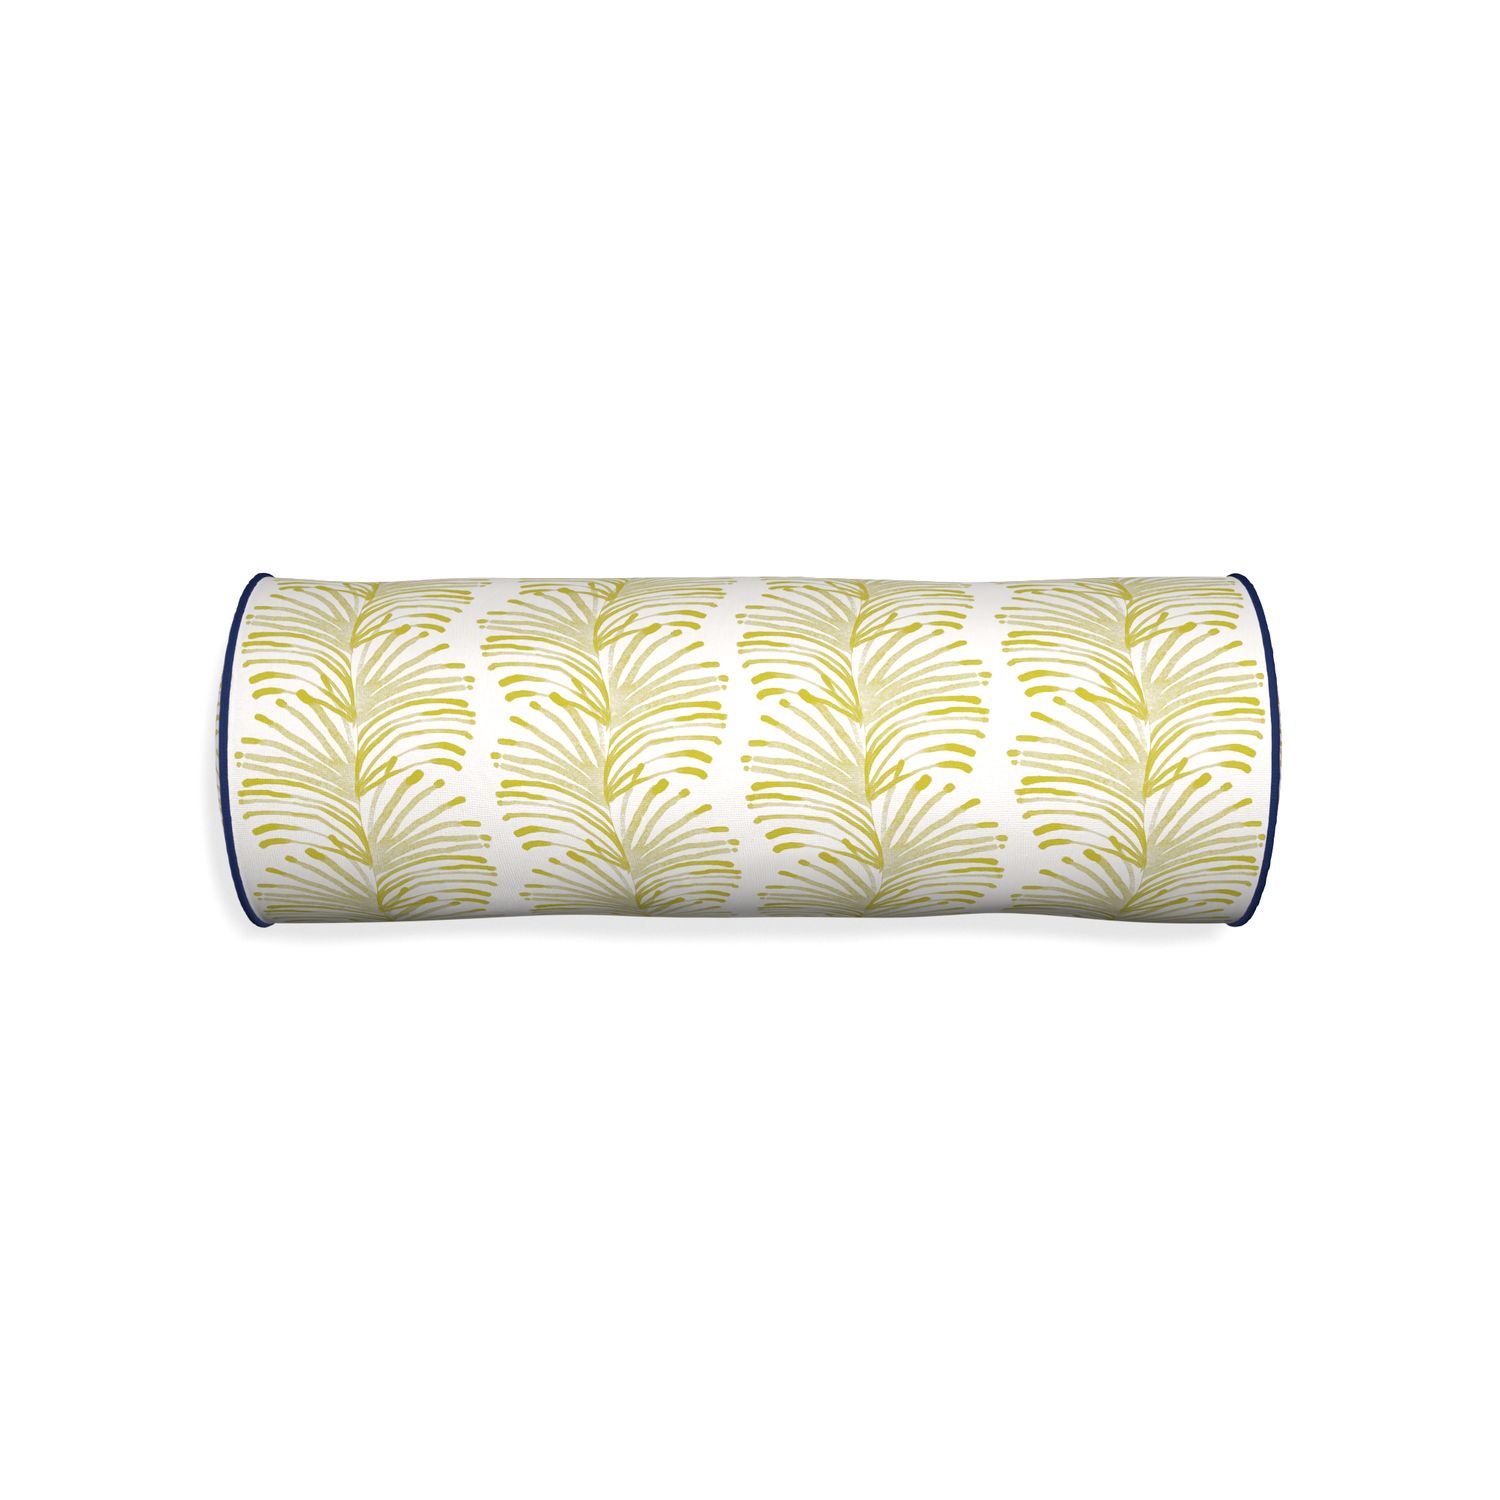 Bolster emma chartreuse custom yellow stripe chartreusepillow with midnight piping on white background